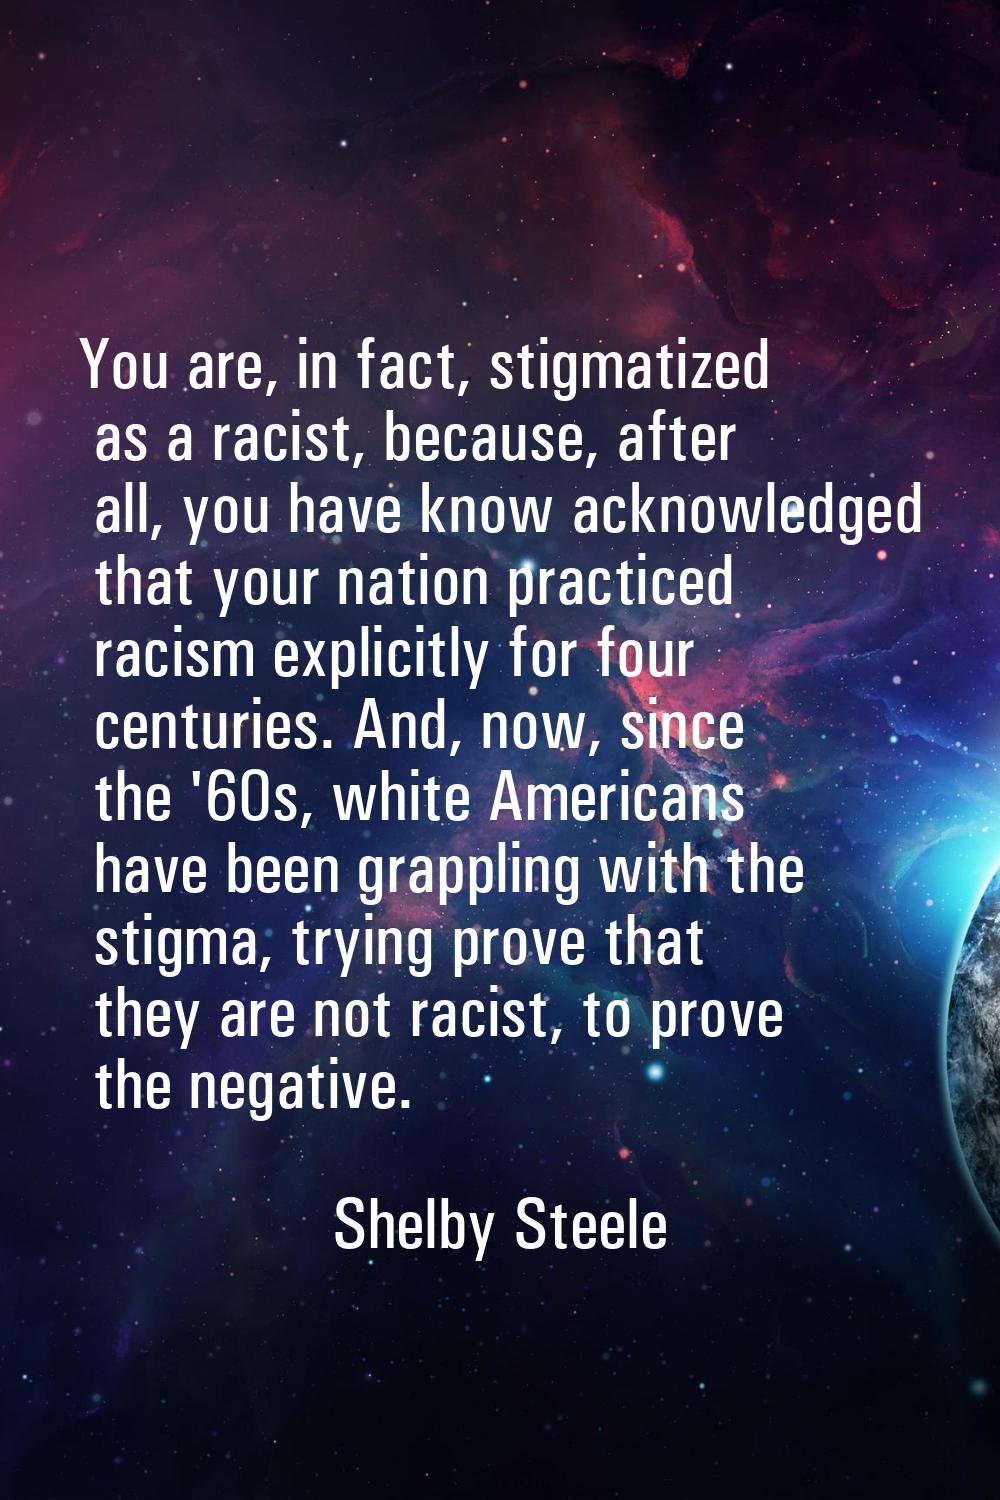 You are, in fact, stigmatized as a racist, because, after all, you have know acknowledged that your